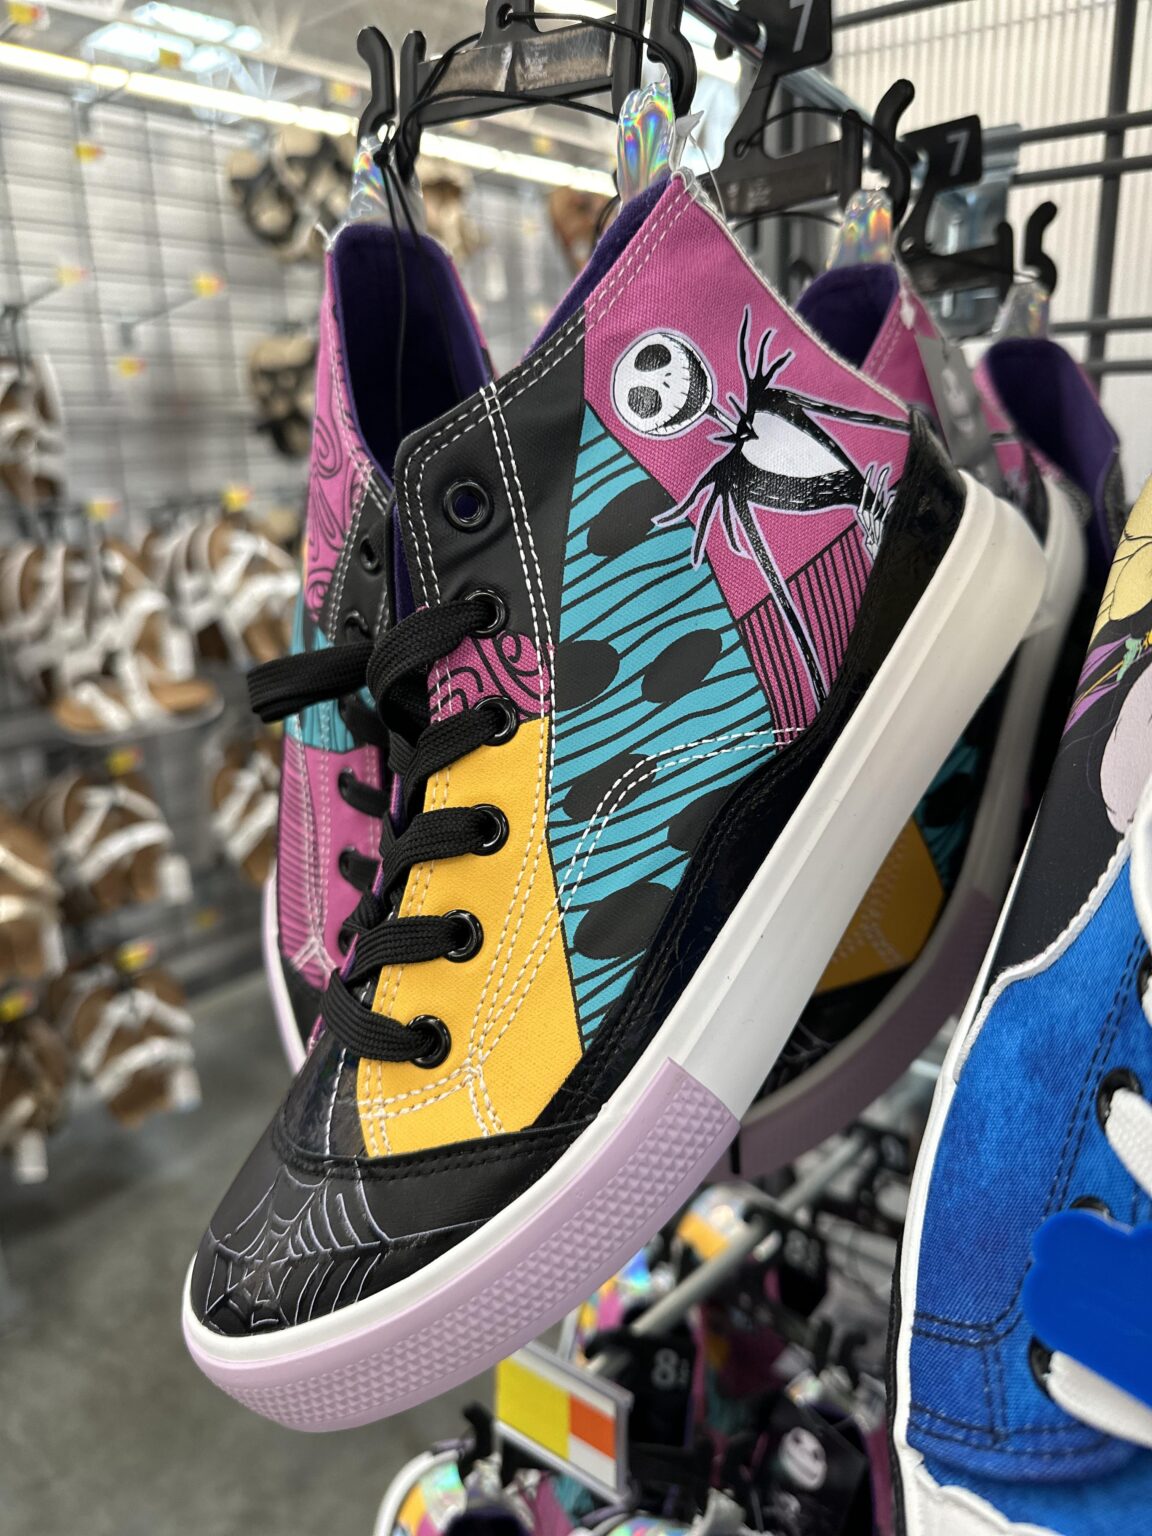 Walk on The Edge With These Disney Shoes